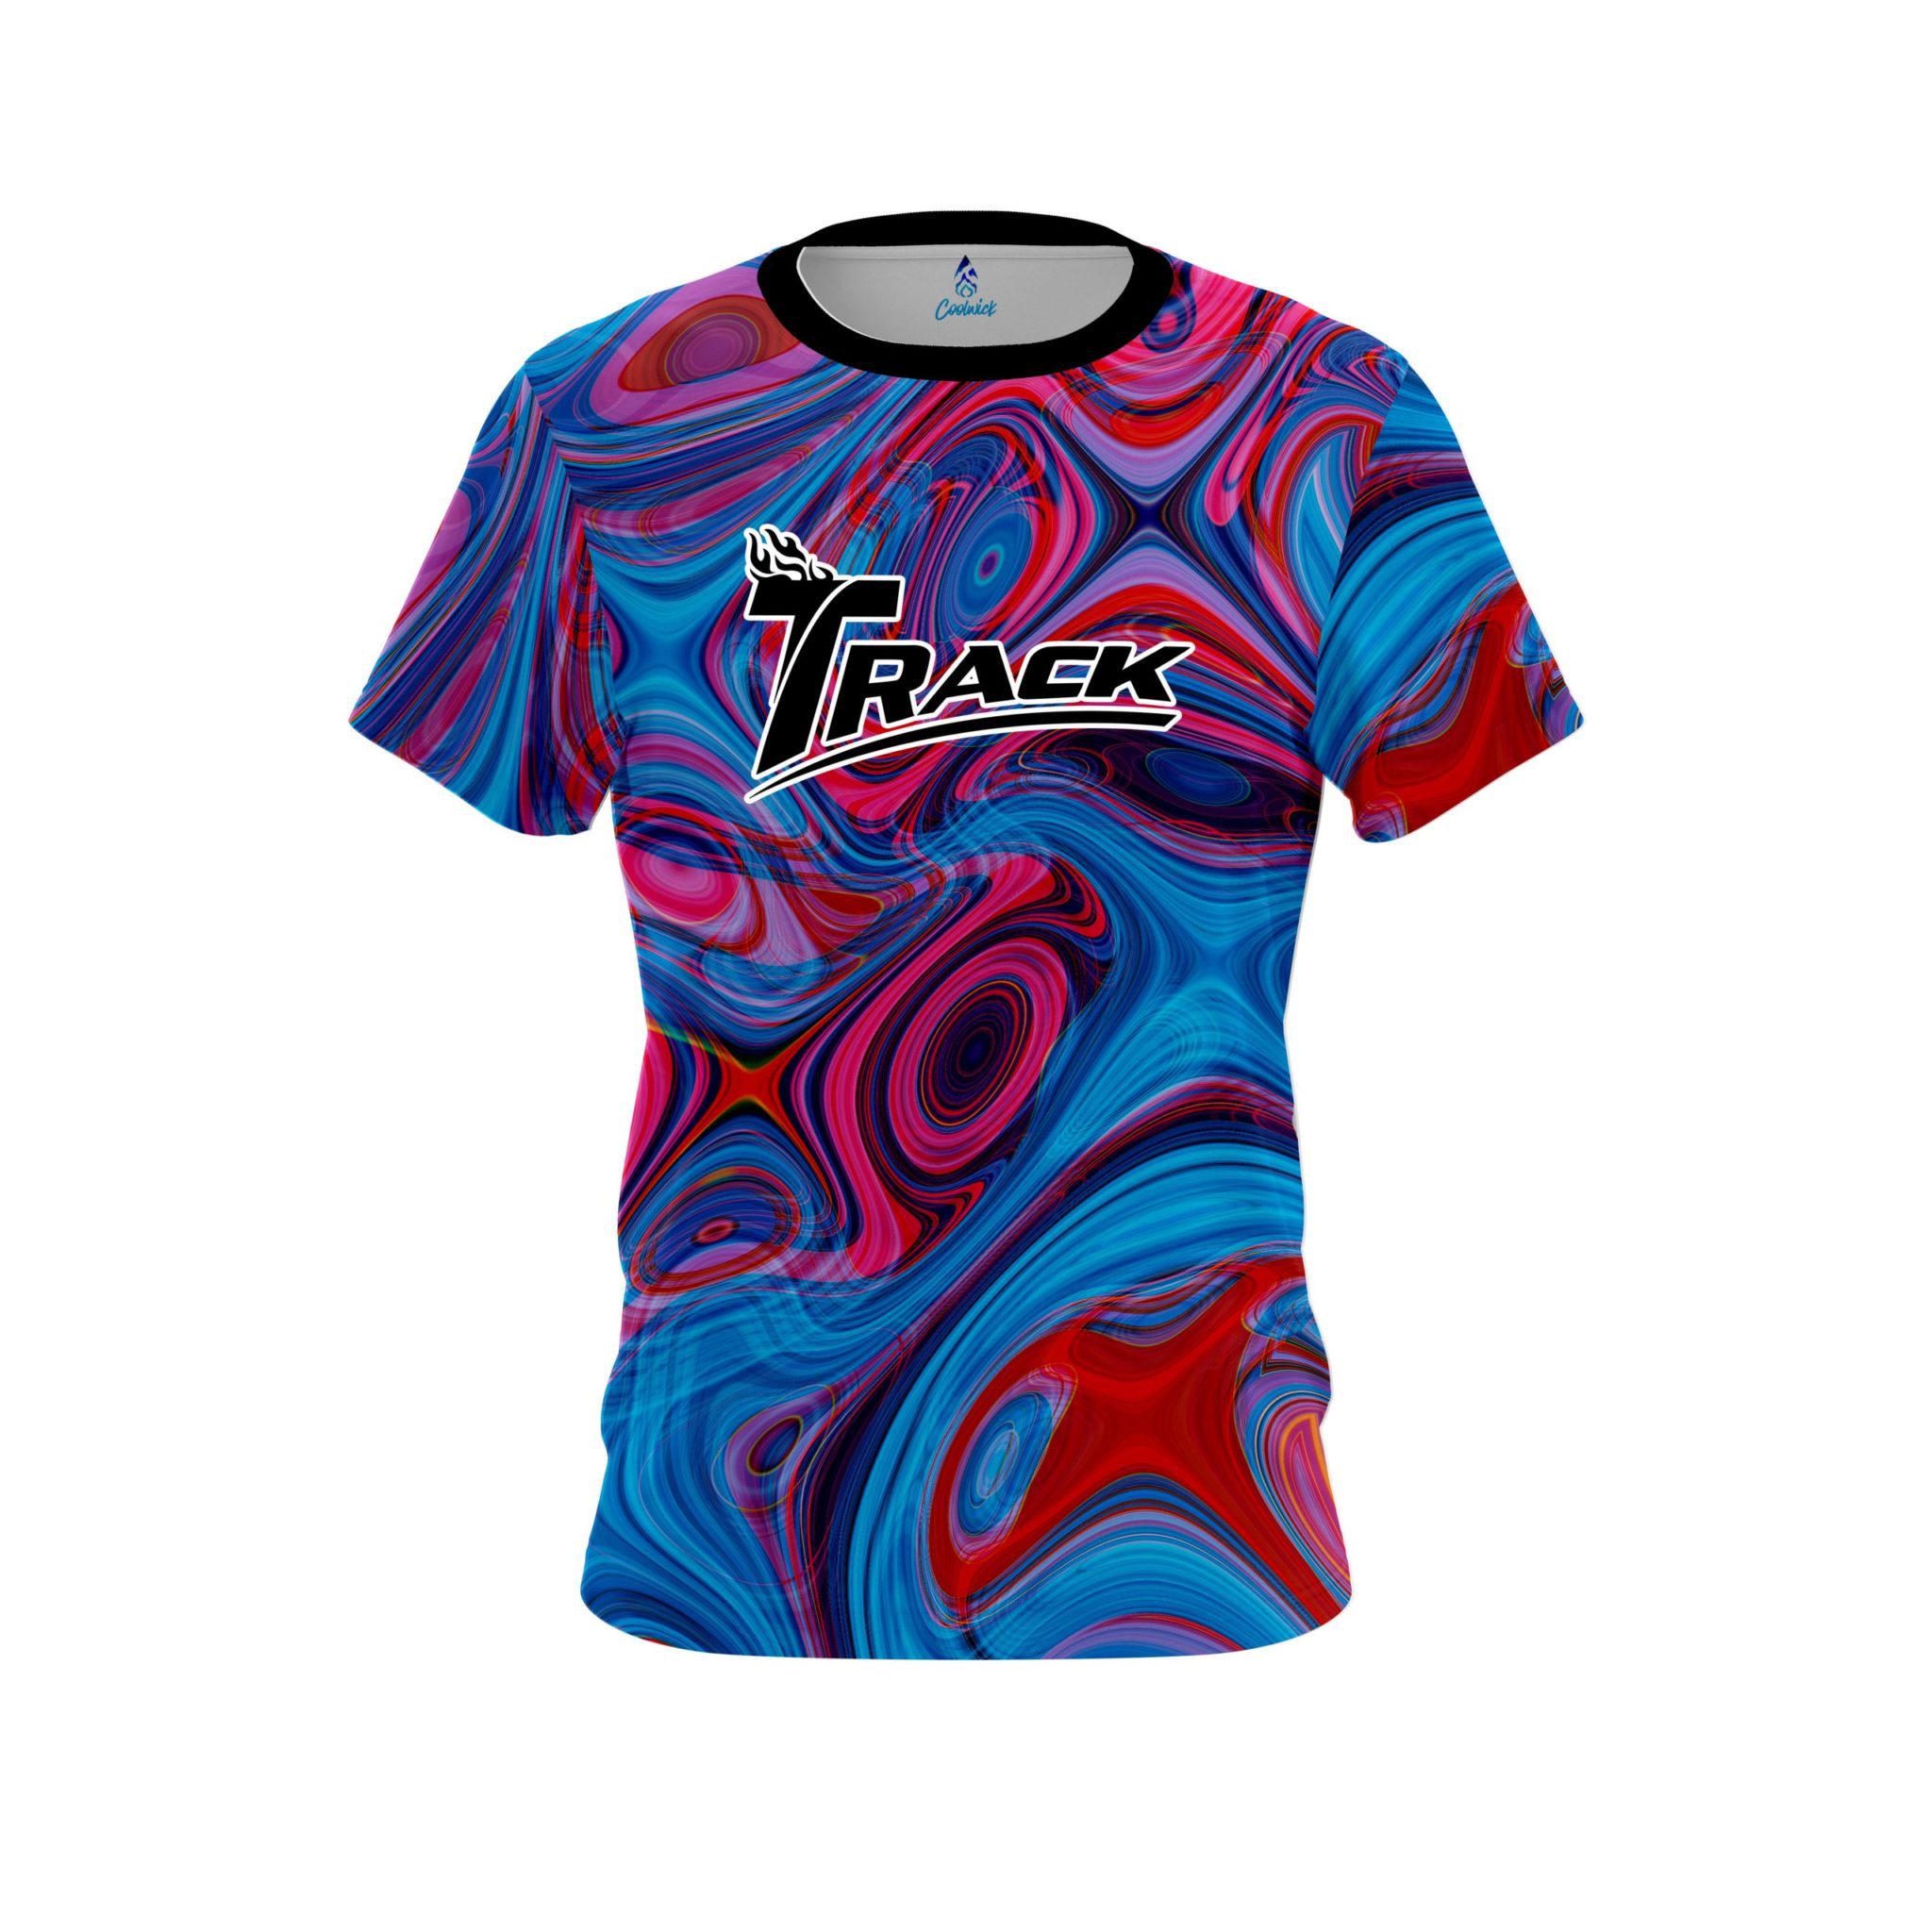 Track Red Pink Hallucinate CoolWick Bowling Jersey